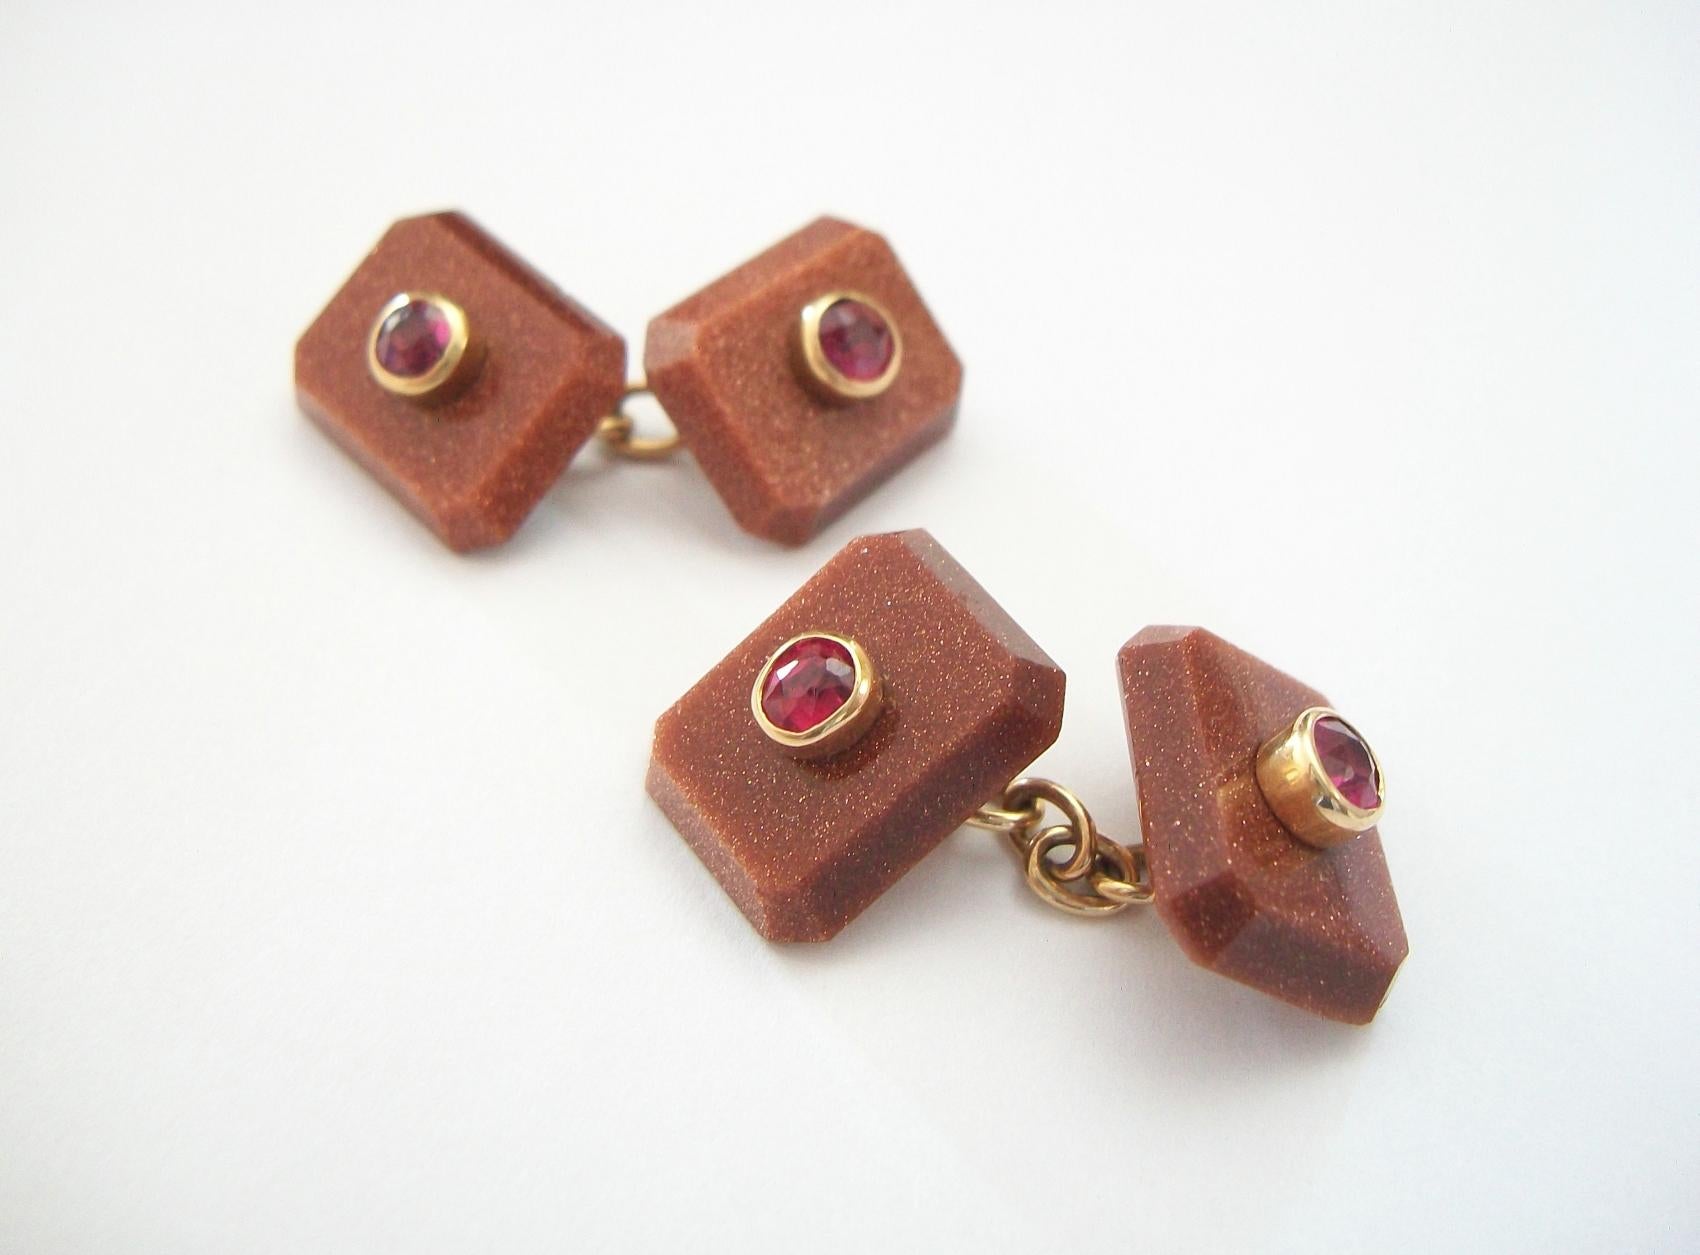 Art Deco Ruby, Goldstone and 18K yellow gold cufflinks - refined and elegant - hand made to the highest quality - each old round cut Ruby bezel set (approx. 1.38 total carat weight - .28 to .40 carats each) - Goldstone backs with beveled edges -